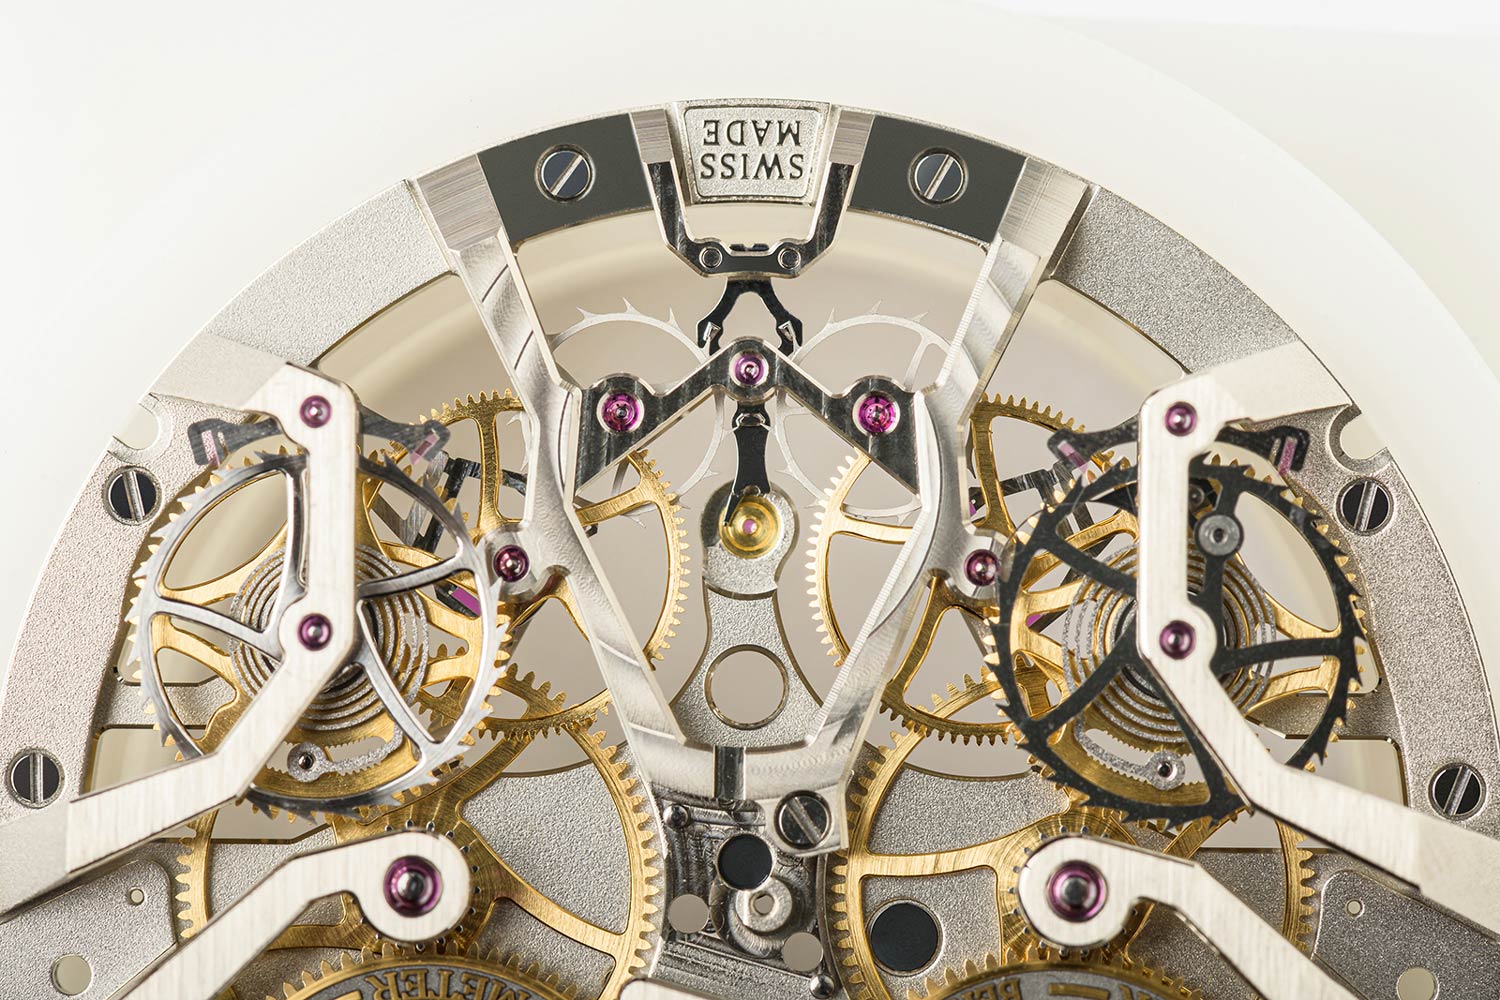 A close up of the independent double-wheel escapement equipped with a pair of remontoirs